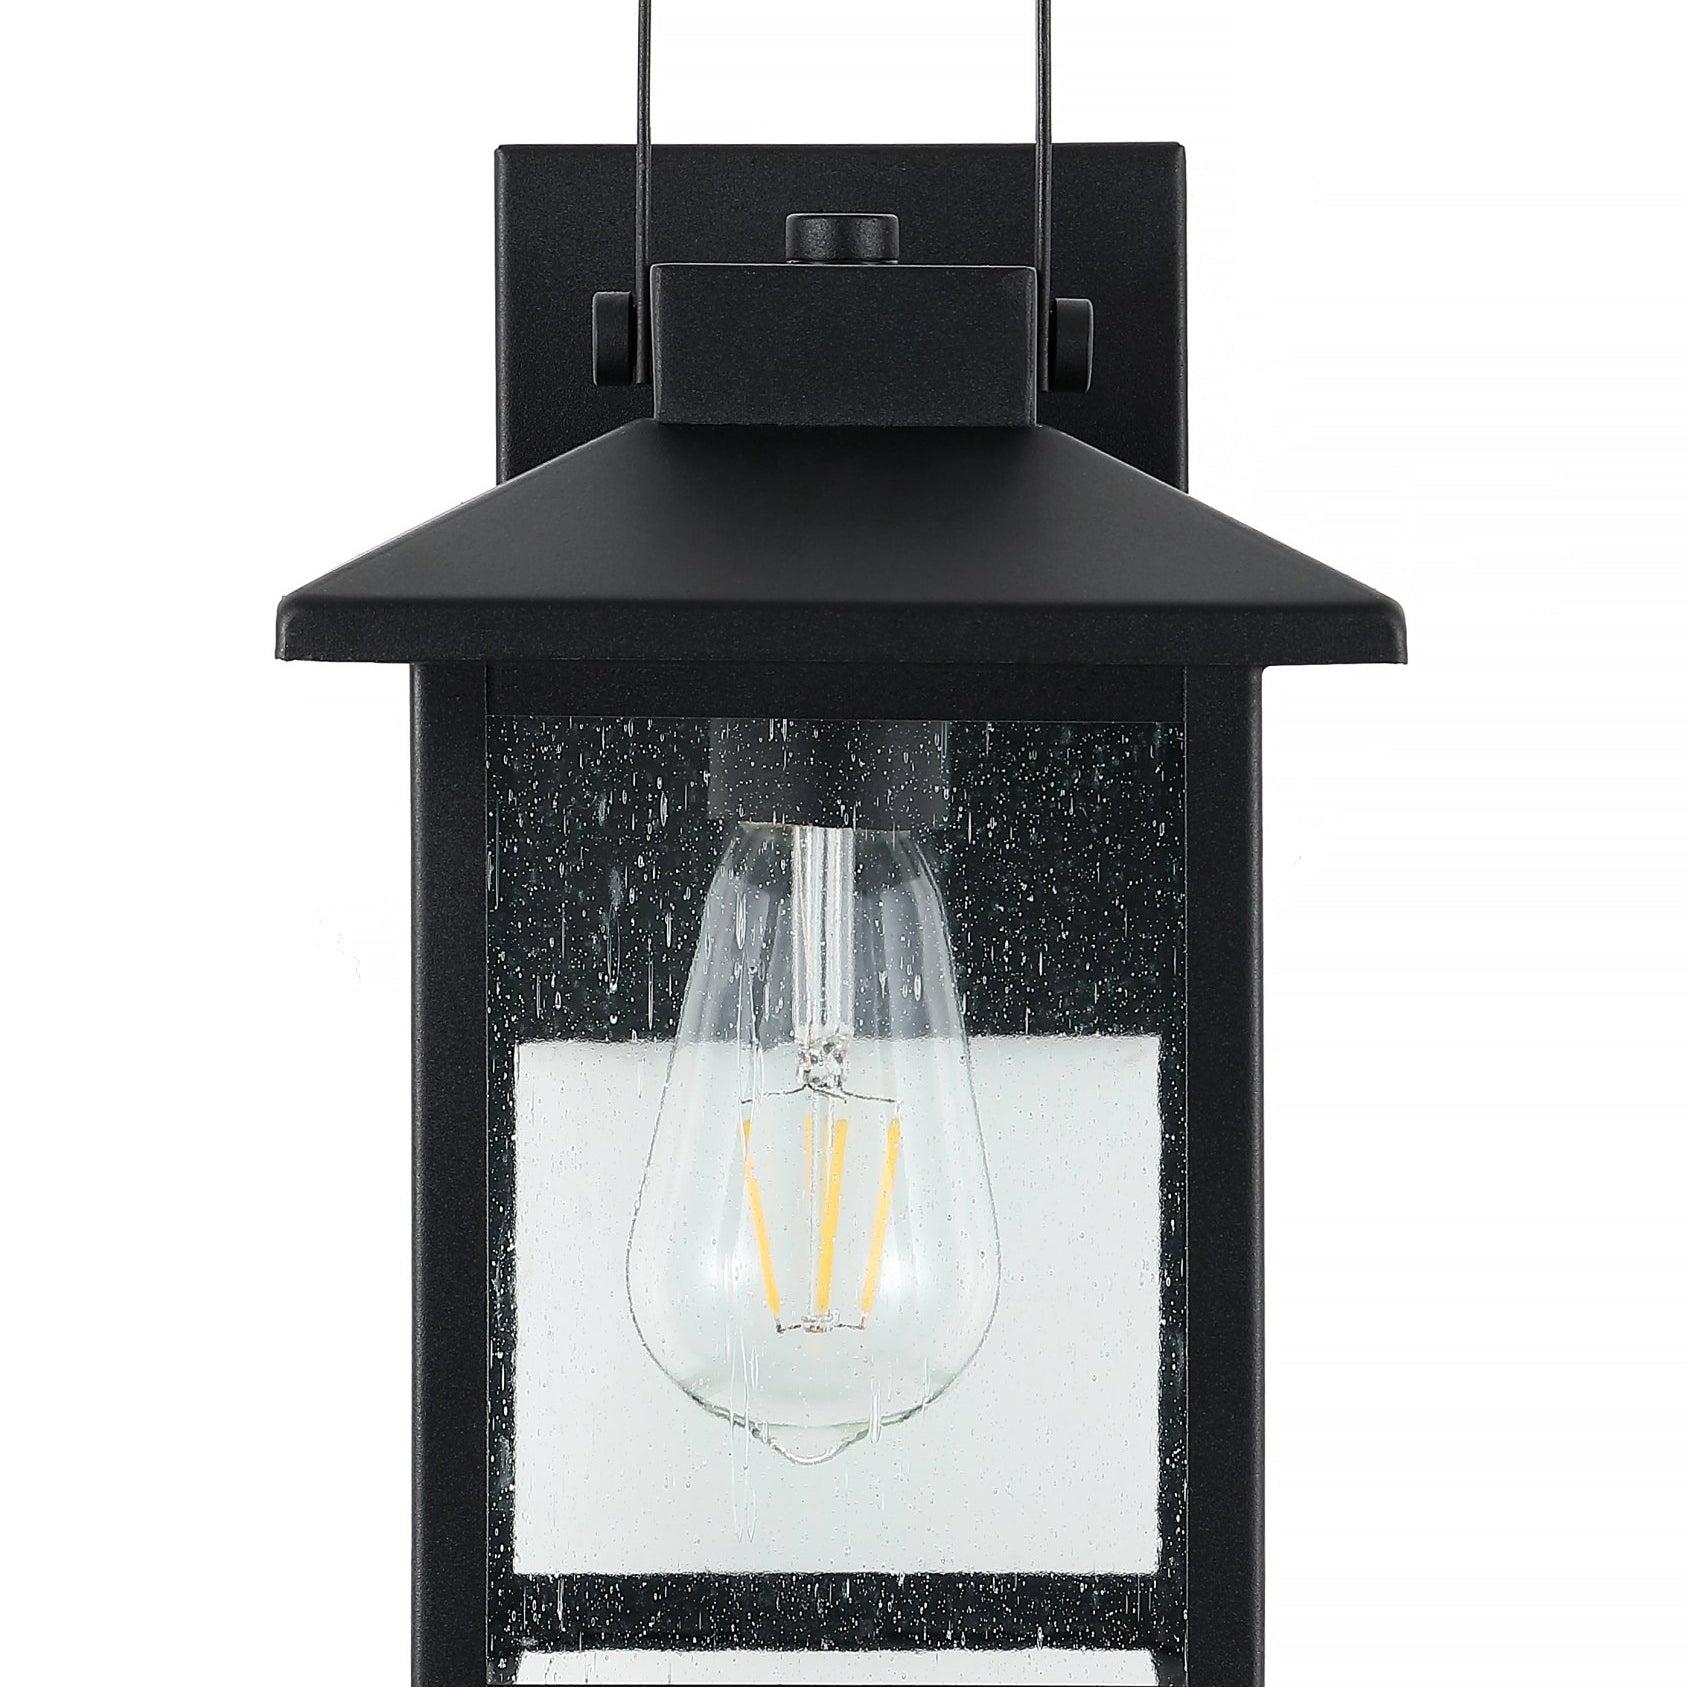 Bungalow Light Iron/Seeded Glass Rustic Traditional Lantern LED Outdoor Lantern - Pier 1